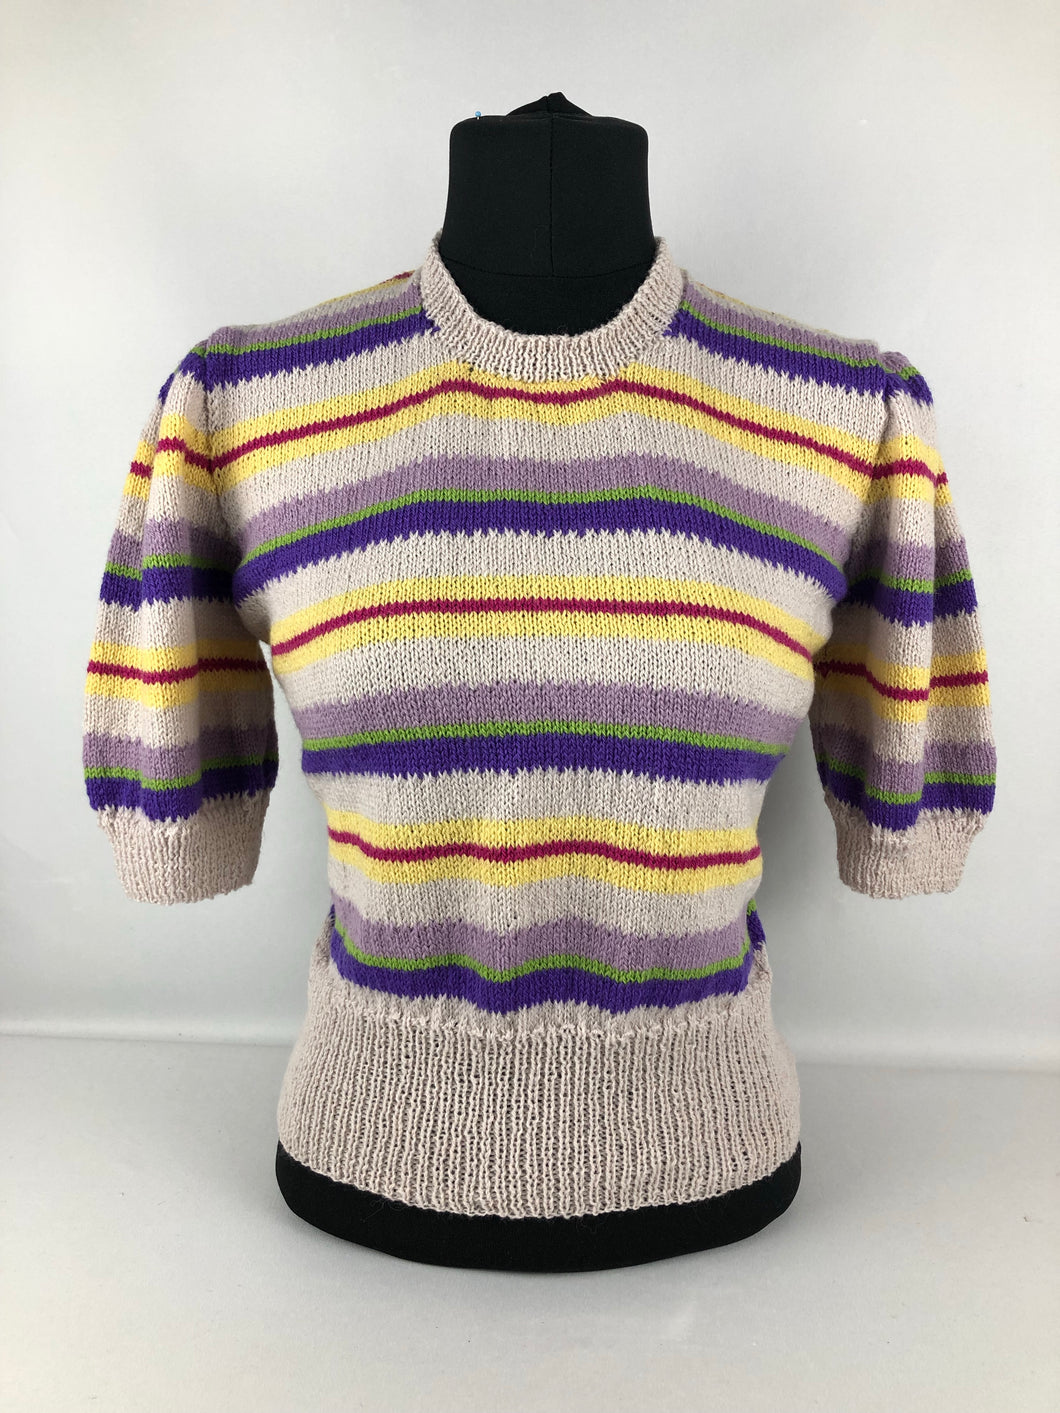 1940s Reproduction Jumper In Colour Stripes - Bust 40 42 - Volup Knitwear